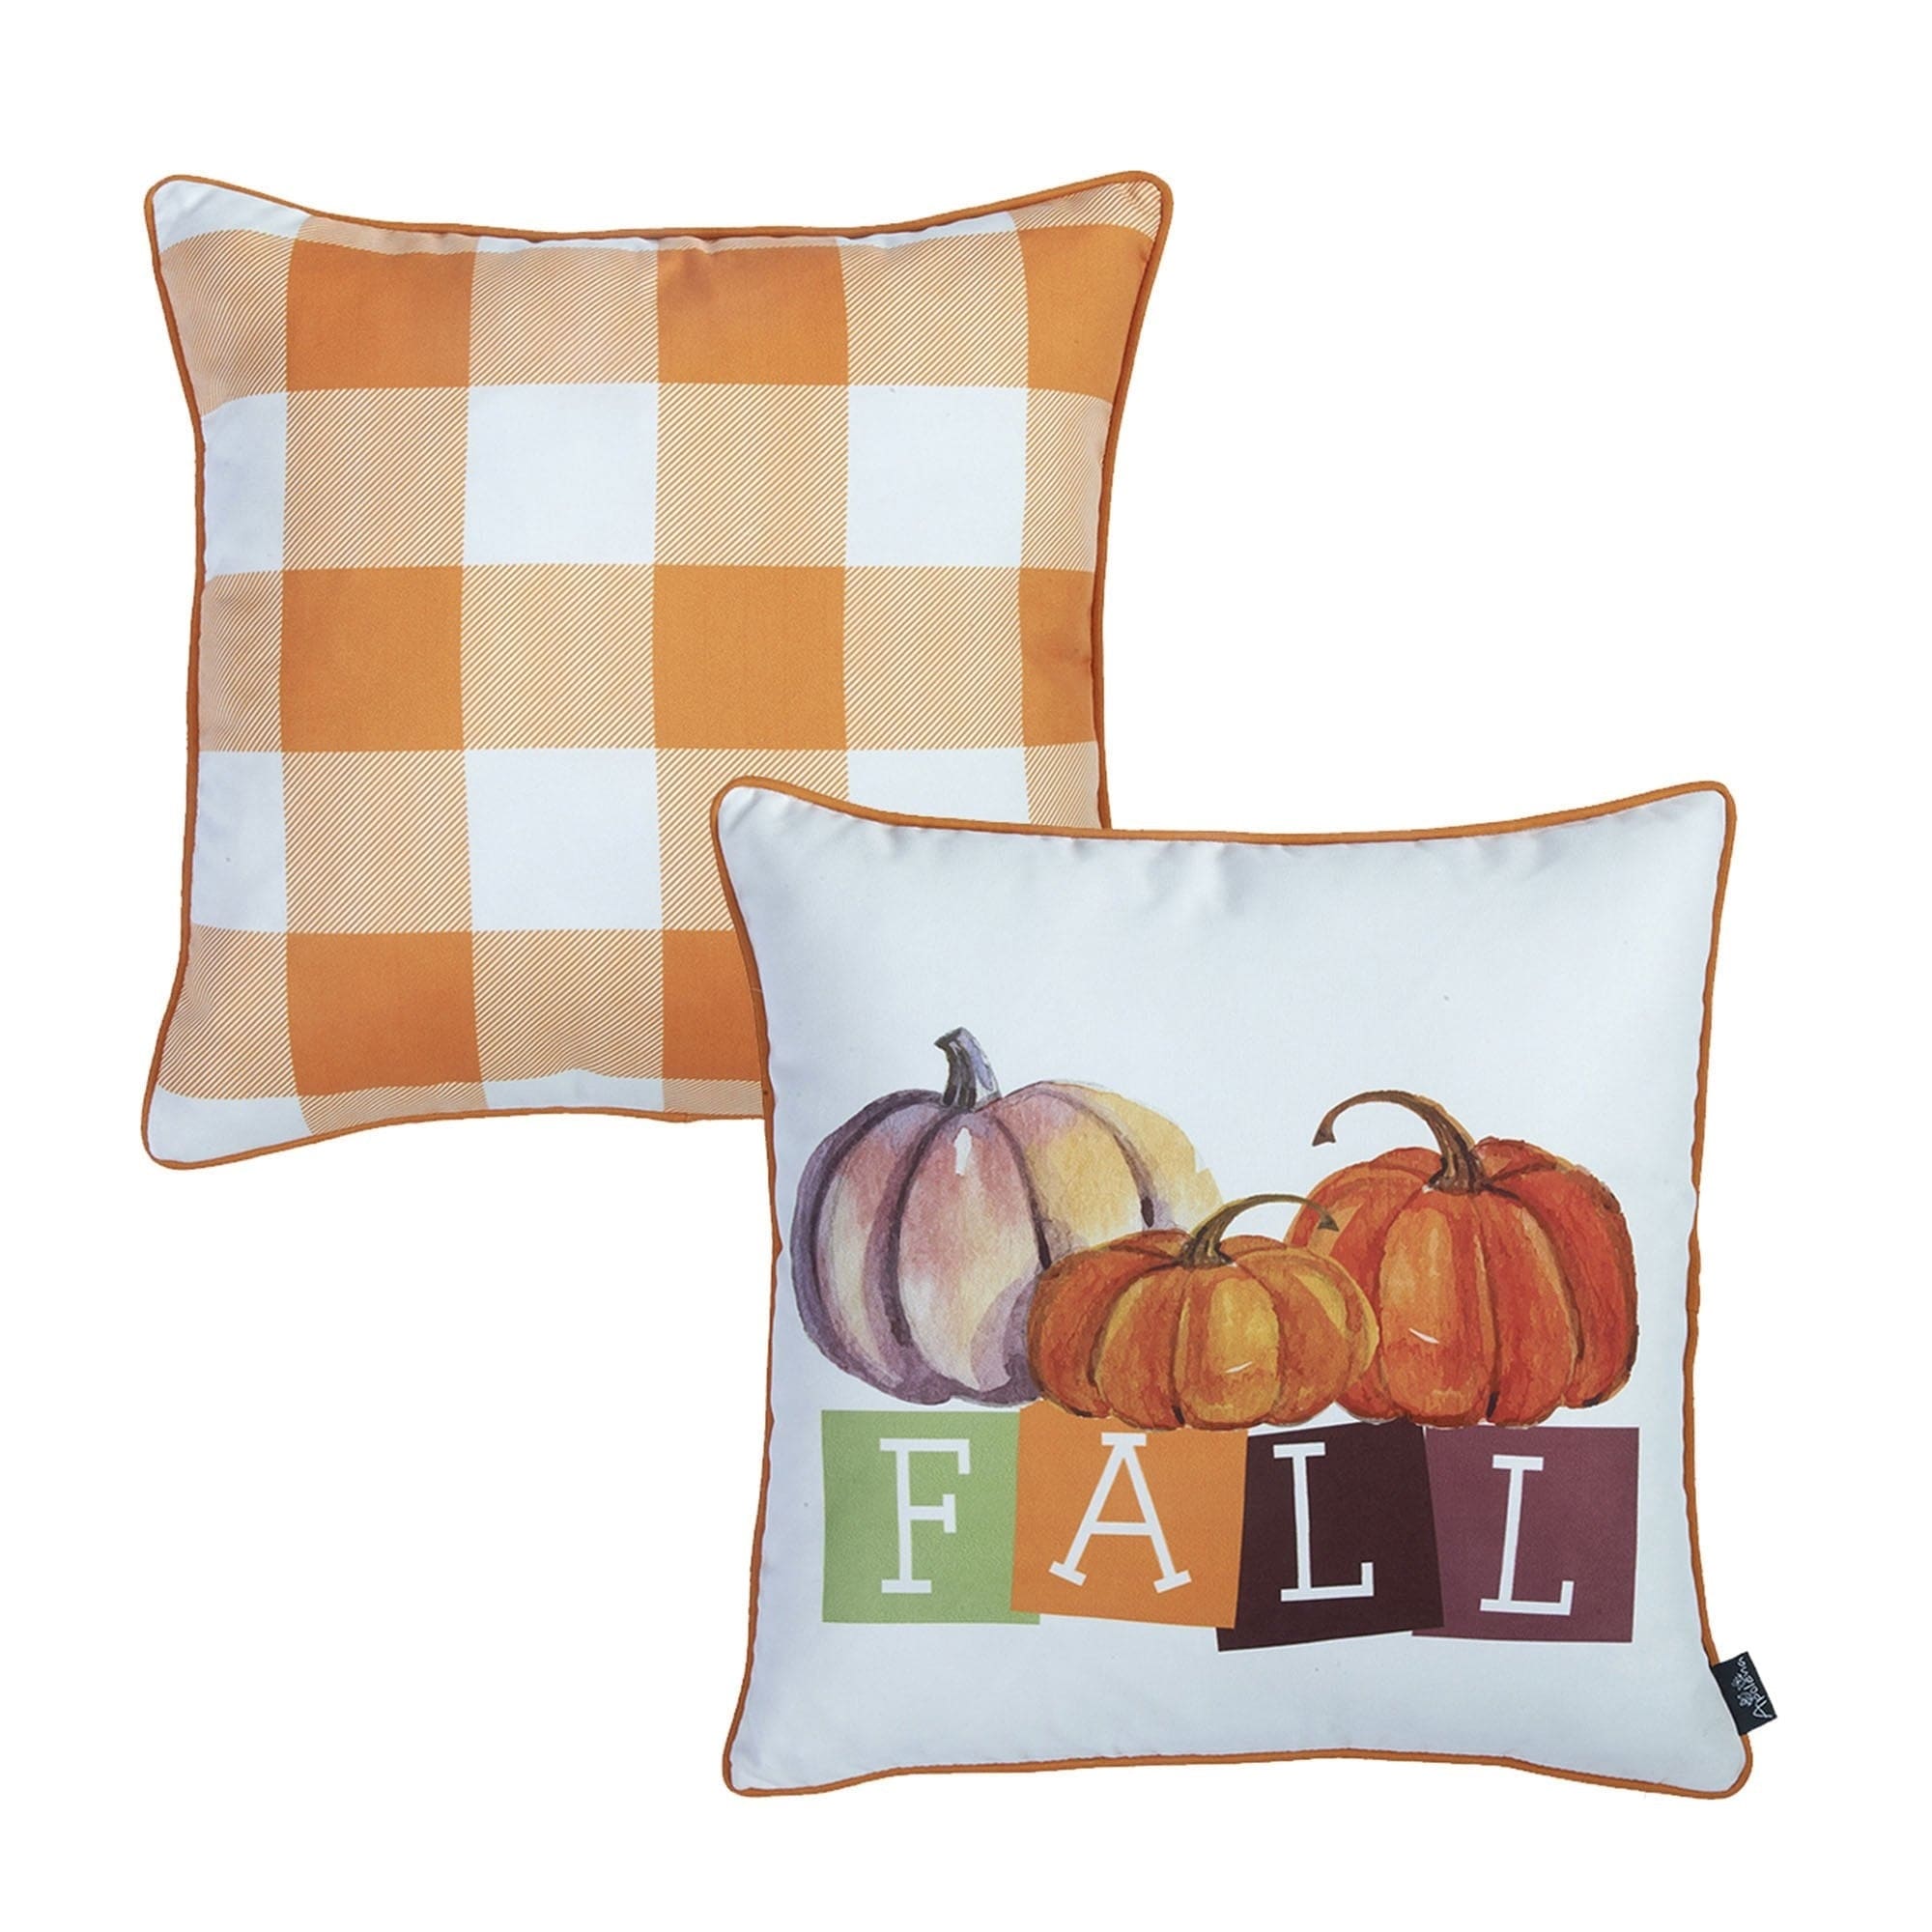 https://ak1.ostkcdn.com/images/products/is/images/direct/a54f0d3e8f08cfd31576f367d681371c63149c37/Decorative-Fall-Thanksgiving-Throw-Pillow-Cover-Set-of-2.jpg